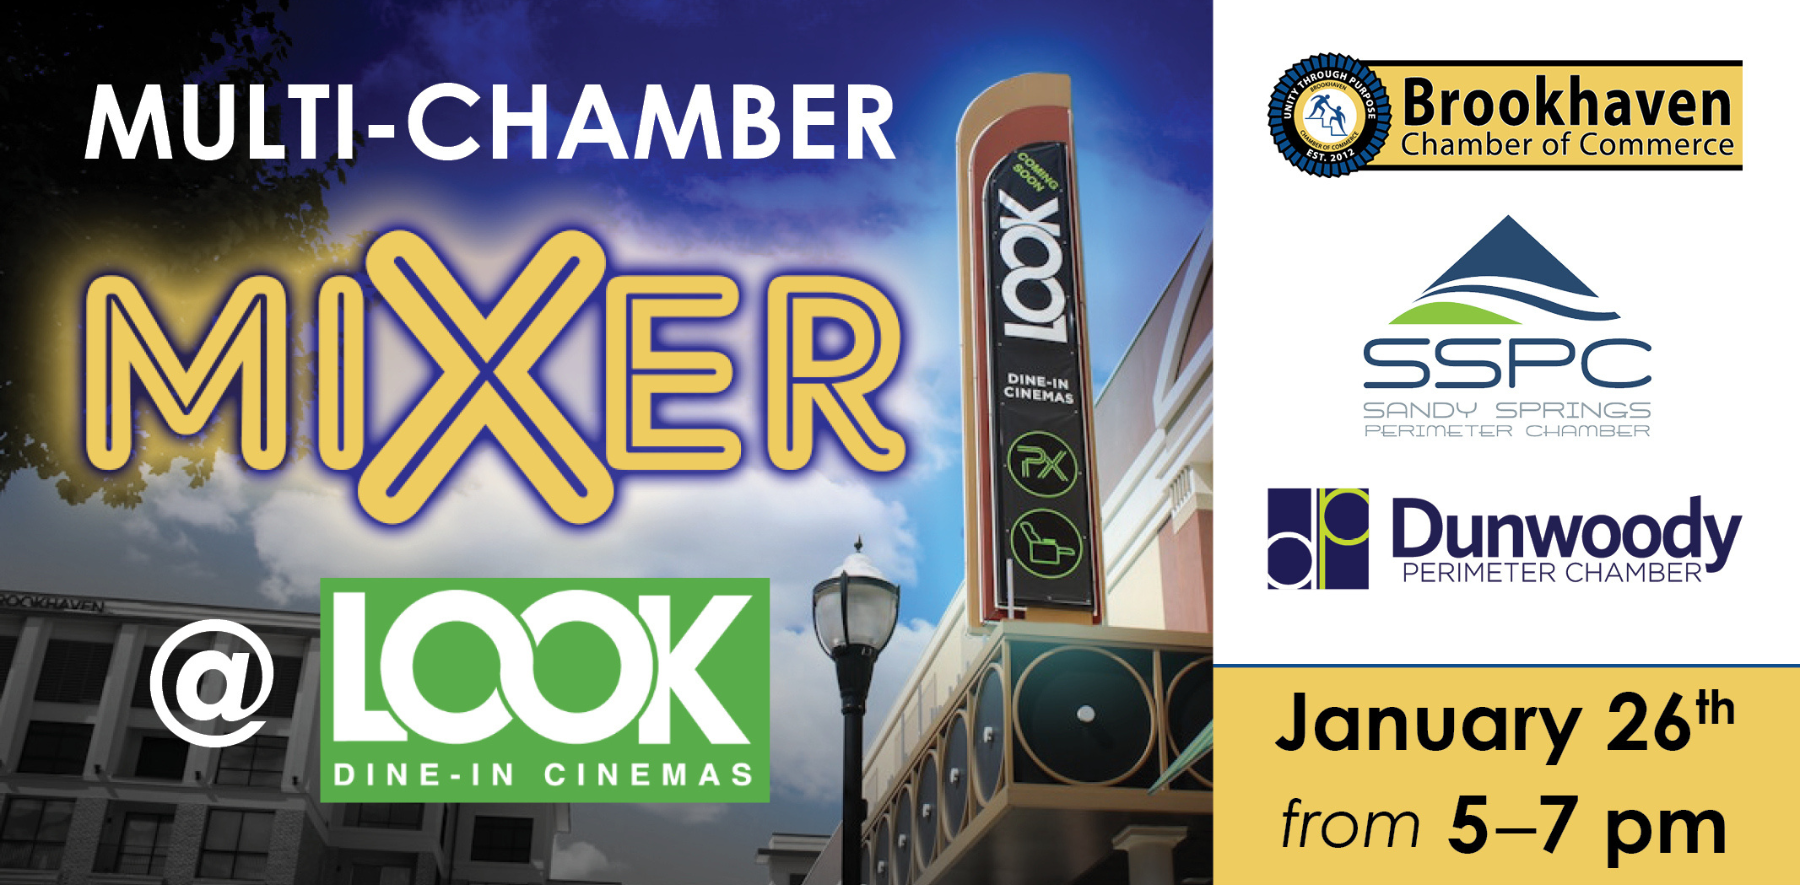 Multi-Chamber MIXER at Look Dine-in Cinemas (January 26)